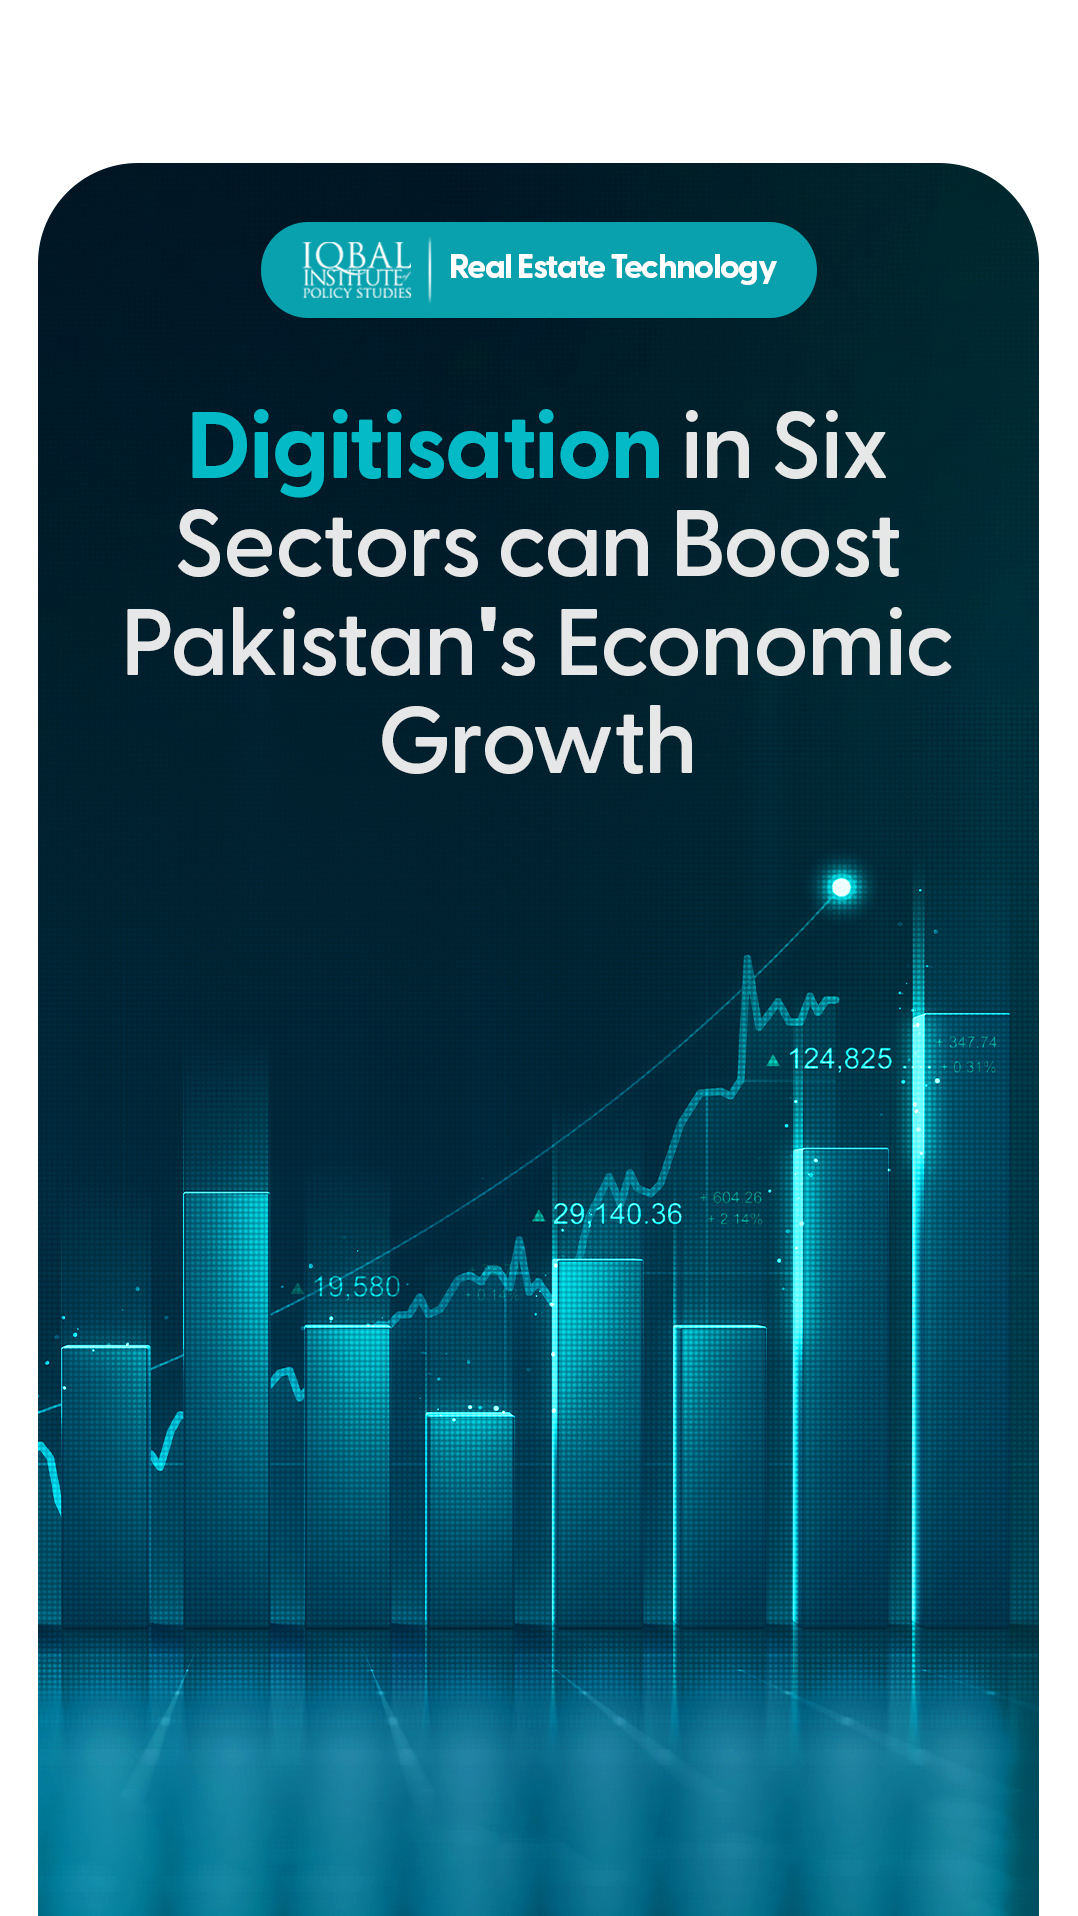 digitisation in Six Sectors can boost Pakistan's economic growth